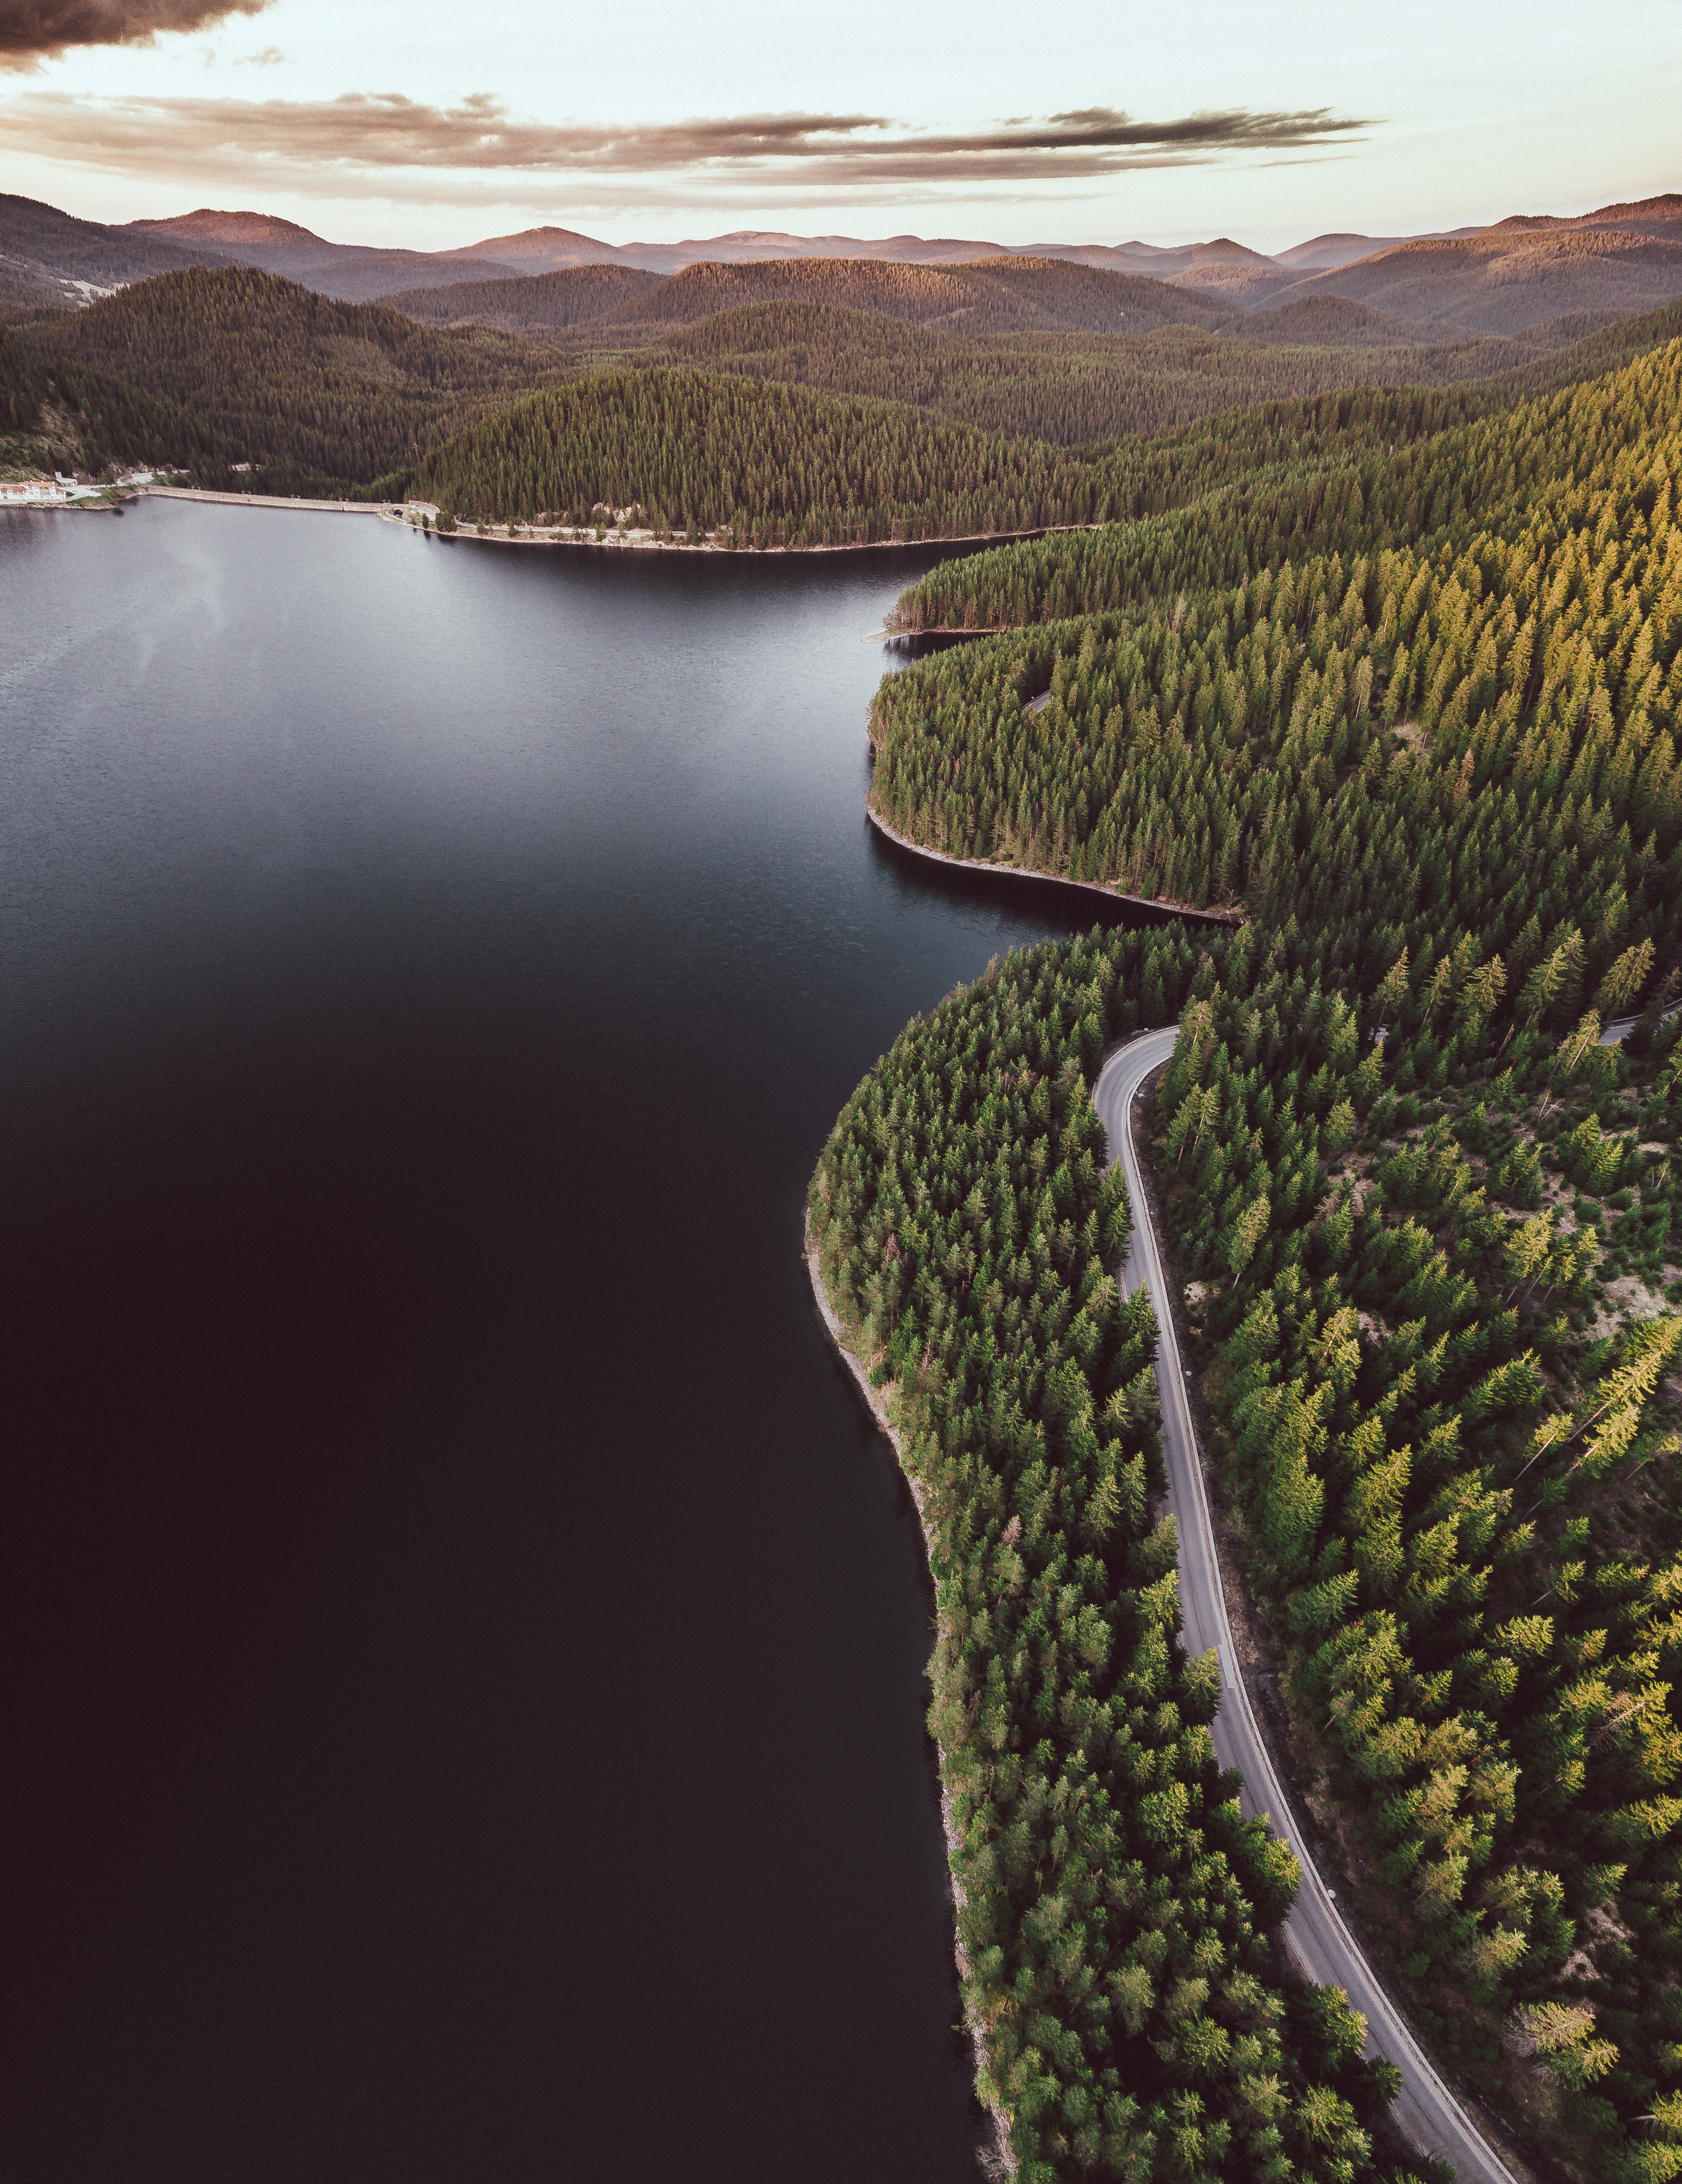 shore, nature, view from above, lake, bank, road, forest, hills 1080p